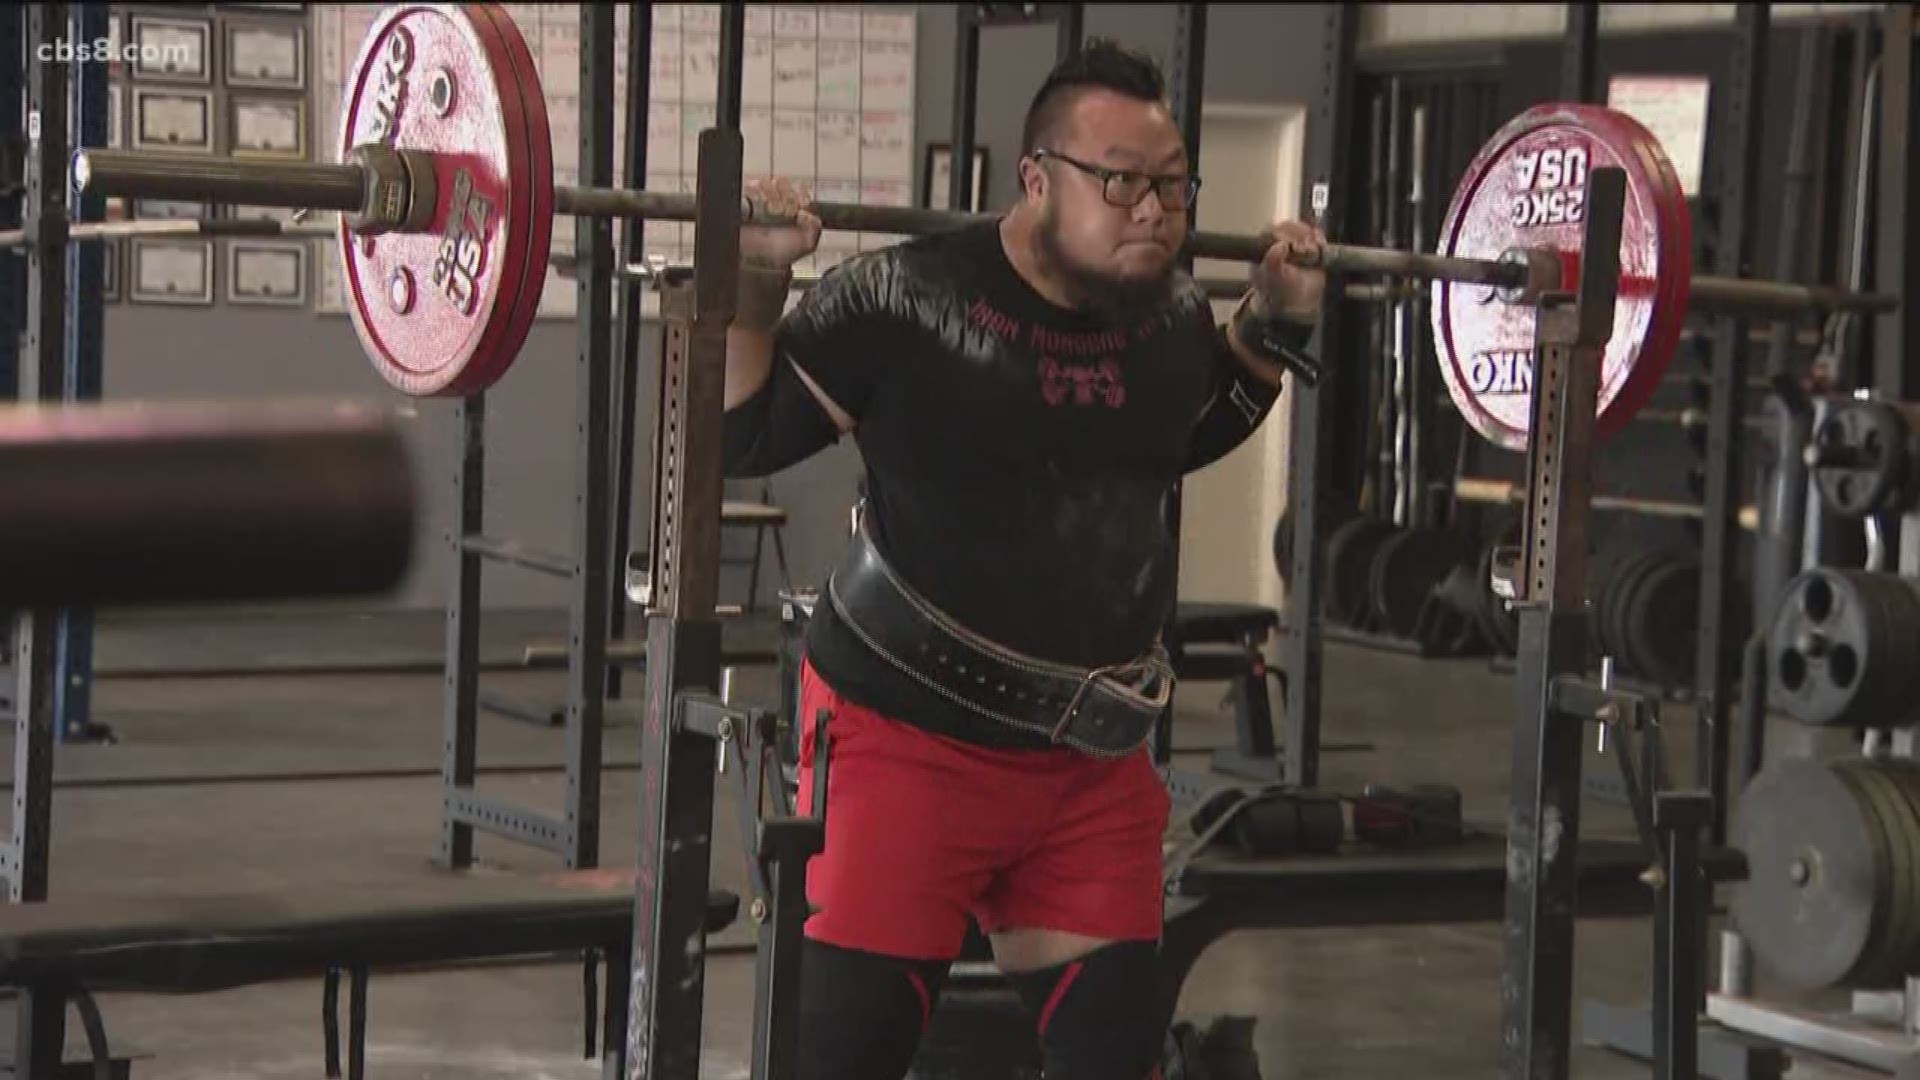 Life can get heavy sometimes, in church and in the weight room. In Monday's Zevely Zone, Jeff traveled to Vista to meet Holgie Choi, the power lifting pastor.